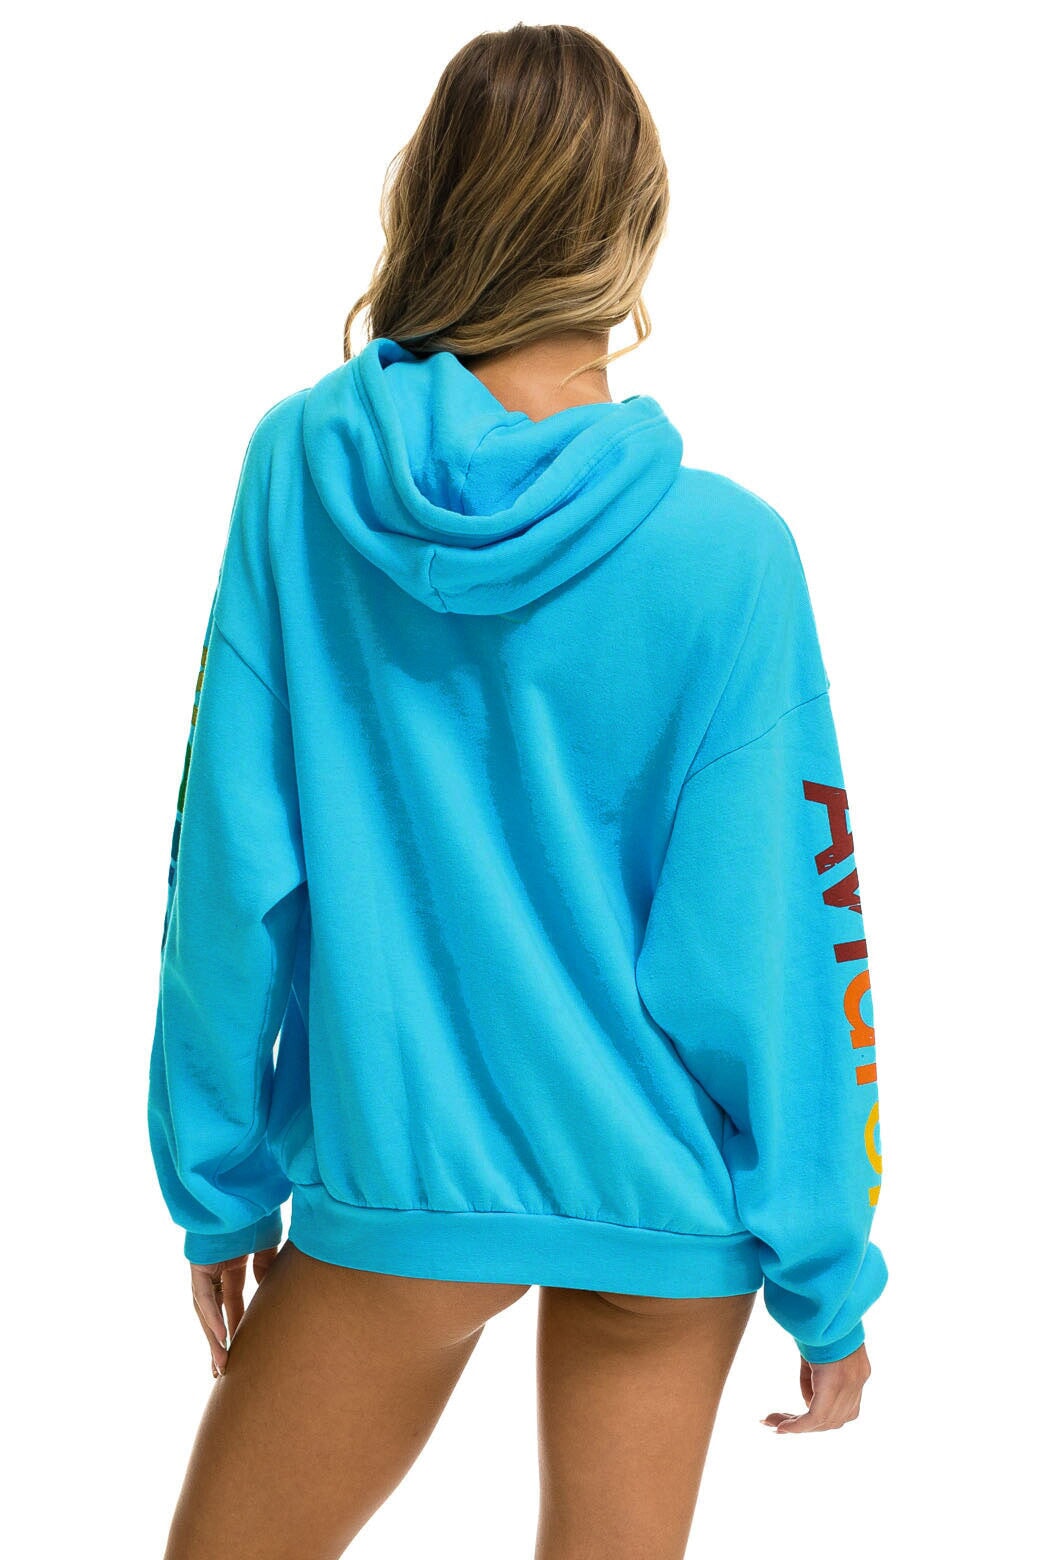 AVIATOR NATION VAIL RELAXED PULLOVER HOODIE - NEON BLUE Hoodie Aviator Nation 